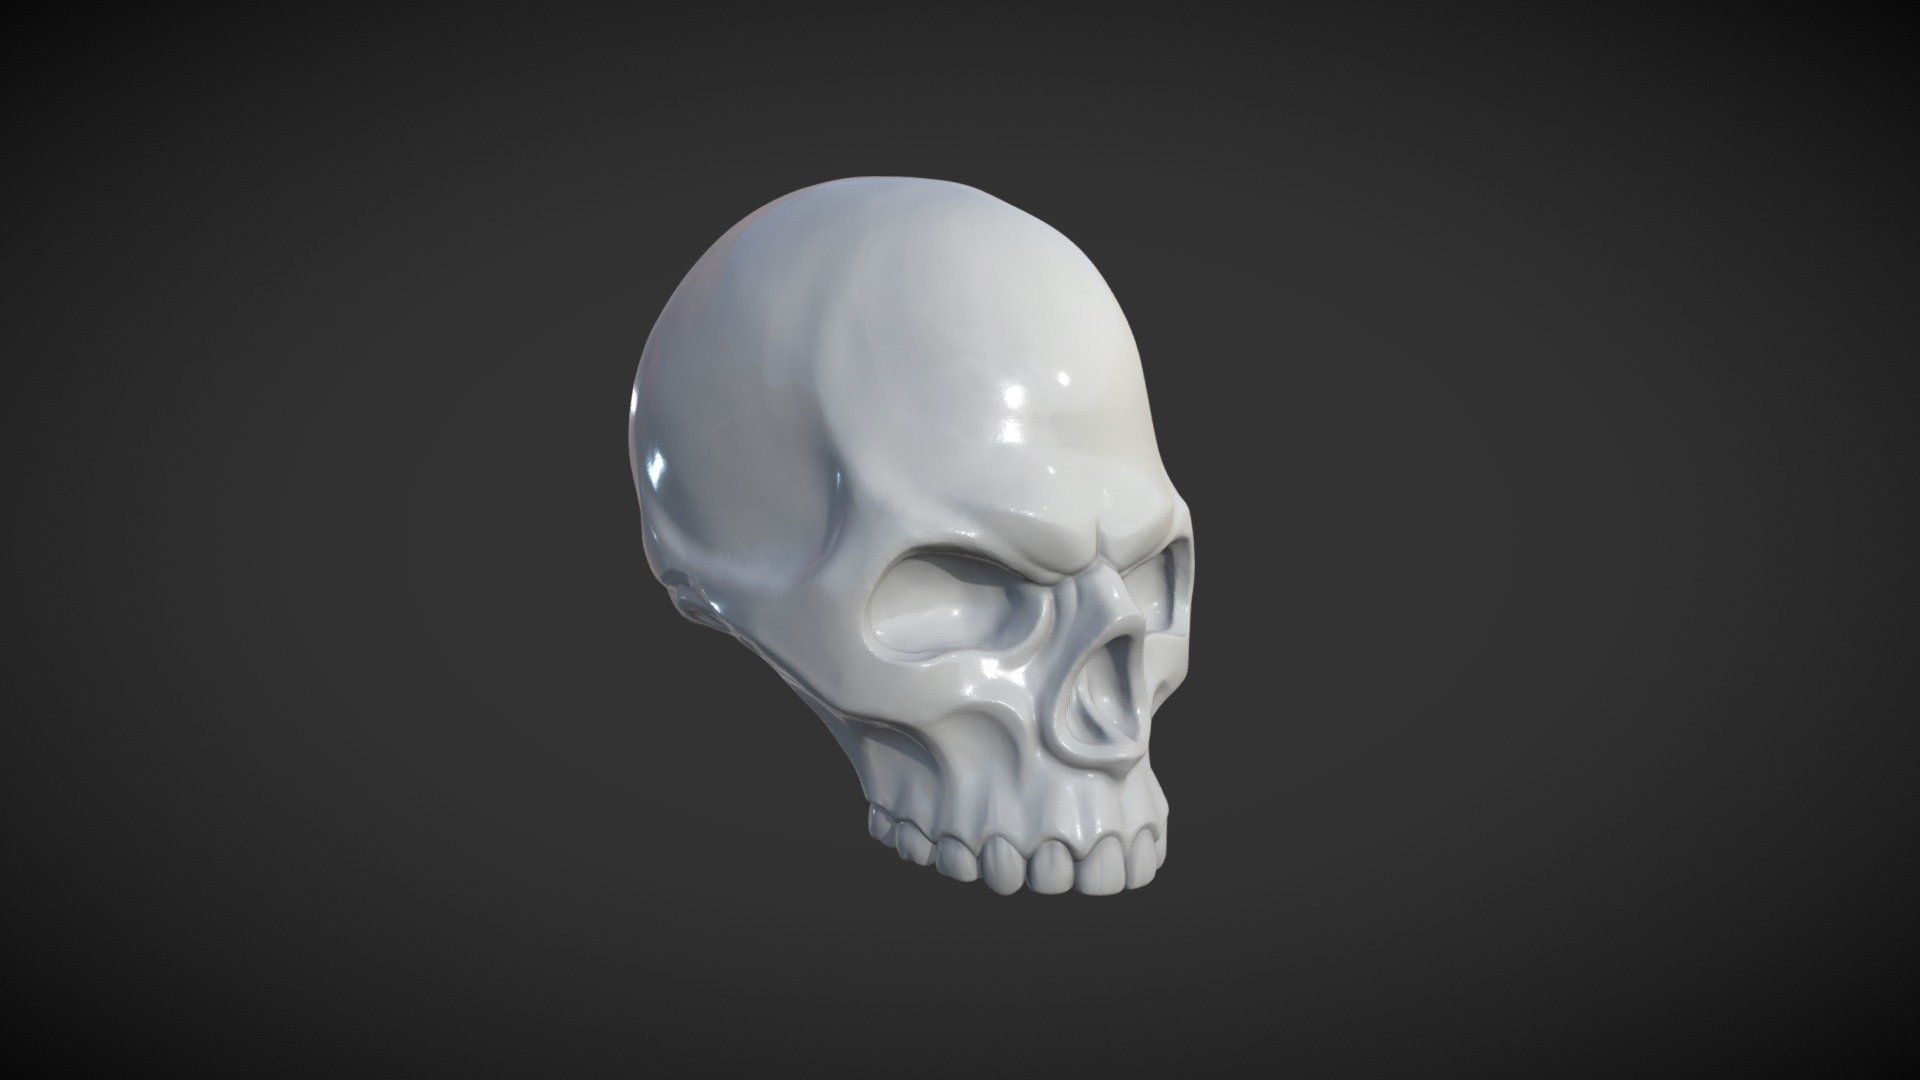 Print ready skull, can be used for CNC carving either.

Measure units are millimeters, it is about 1.5 cm in height.

Mesh is manifold, no holes, no bad contiguous edges.

Three version of the skull are available:

1) Stylized_Skull_parts (.blend, .obj) Contains the skull and the theeh

2) Stylized_Skull_solid (.blend, .stl, .obj, .fbx, .step) Contains one solid object, the skull. 318146 triangular faces.

3) Stylized_Skull_hollow (.blend, .stl, .obj, .fbx, .step)  Contains hollow object, wall thickness is about 0.8 mm. 321176 triangular faces.

step(stp) formats has lesser amount of faces 3d model